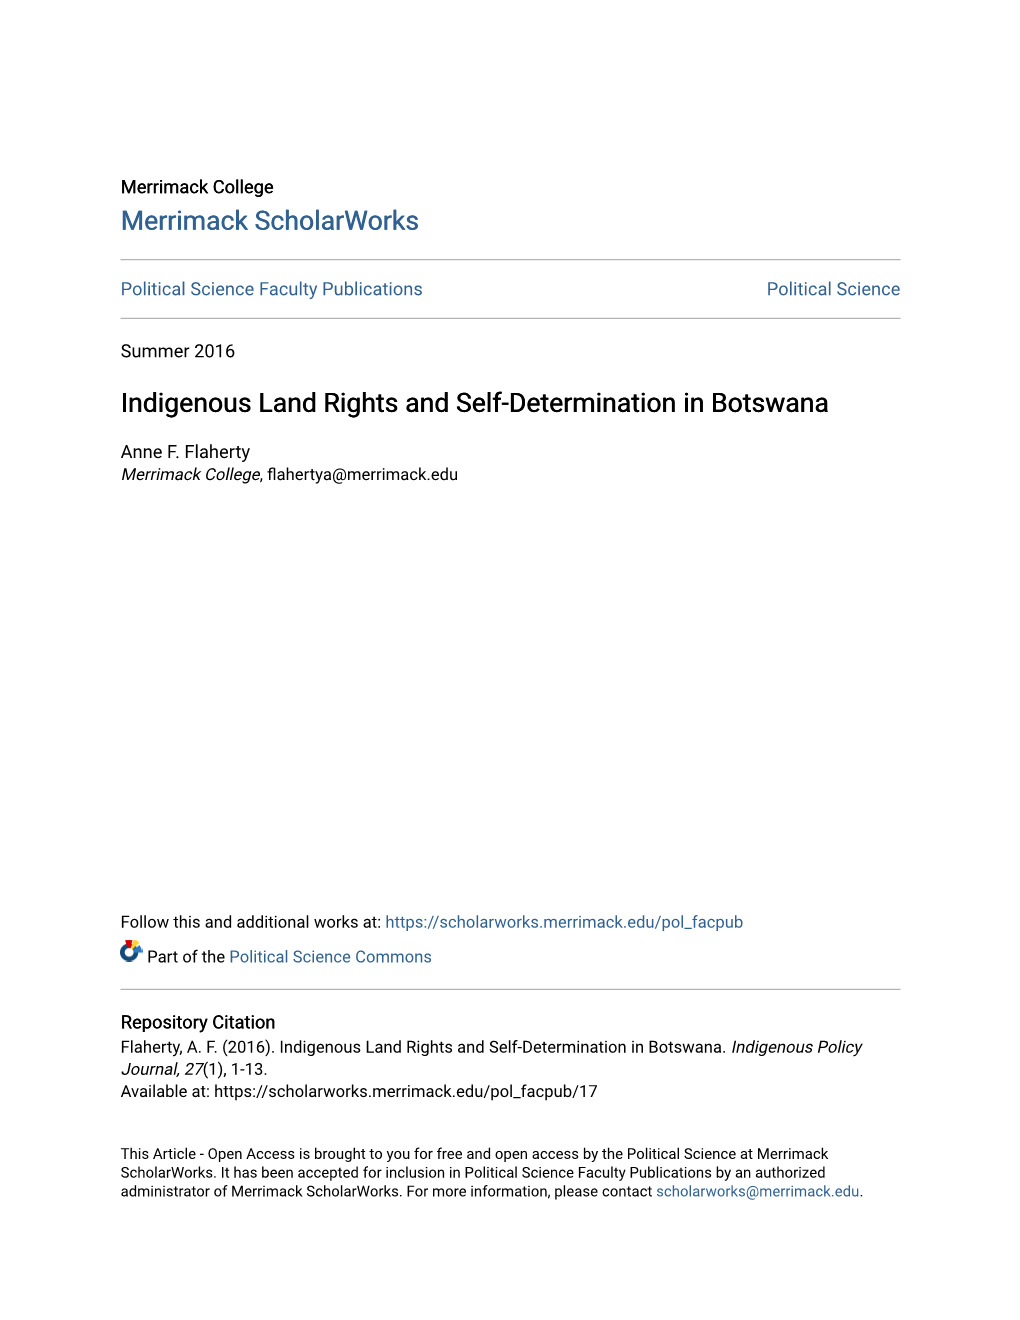 Indigenous Land Rights and Self-Determination in Botswana